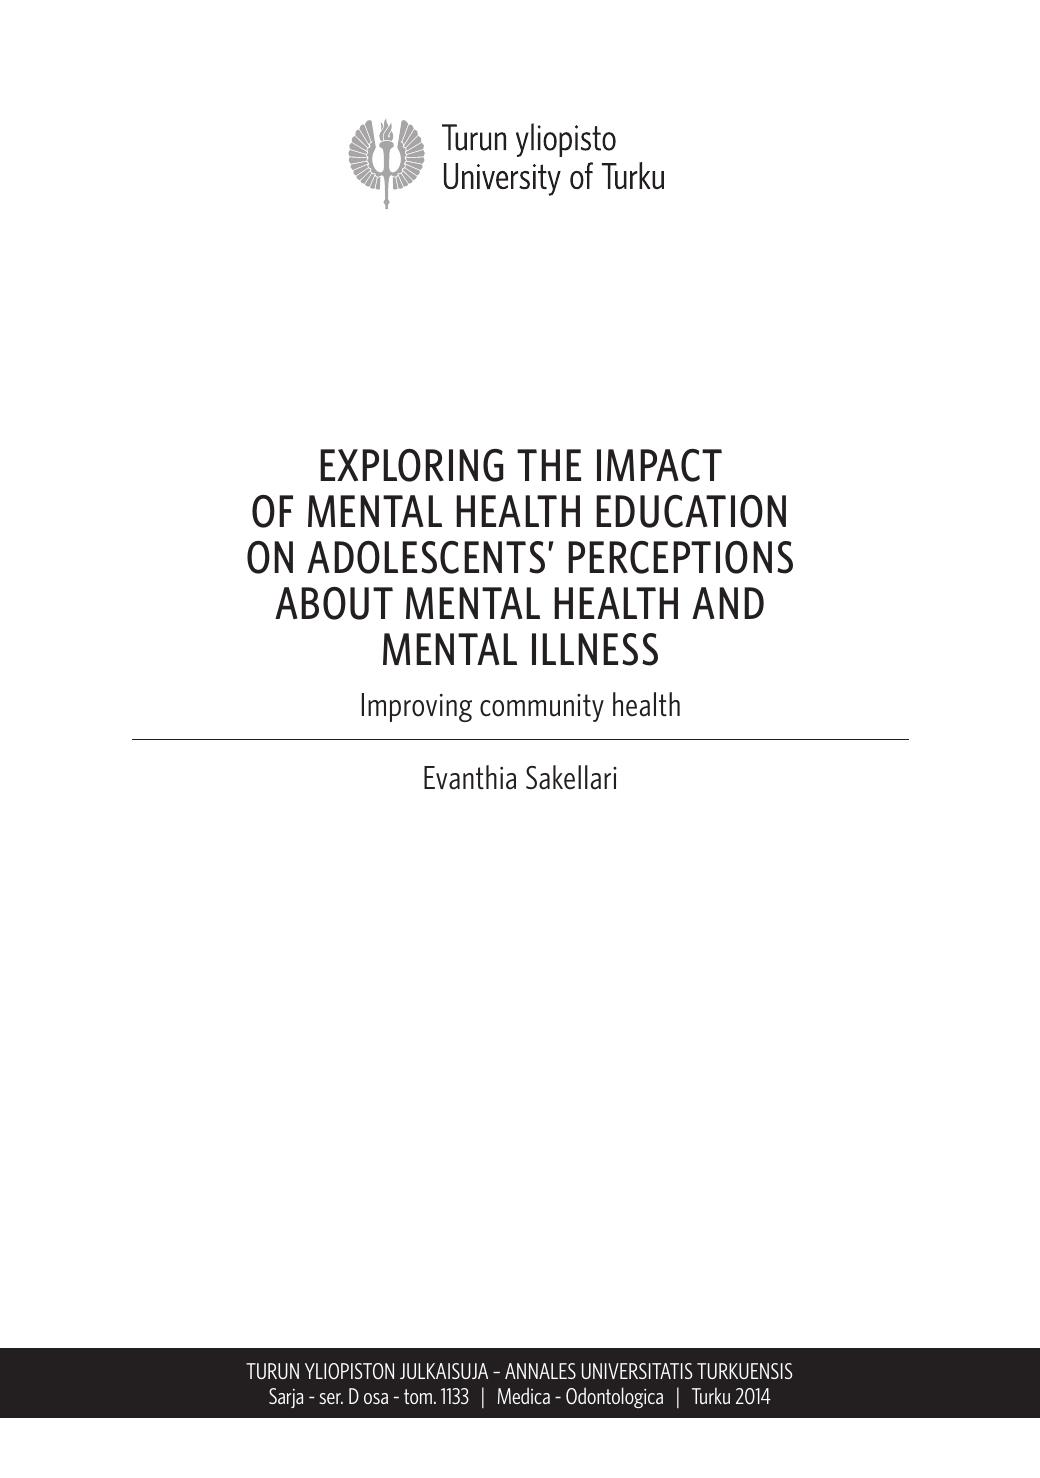 EXPLORING THE IMPACT OF MENTAL HEALTH EDUCATION ON ADOLESCENTS’ PERCEPTIONS ABOUT MENTAL HEALTH AND MENTAL ILLNESS